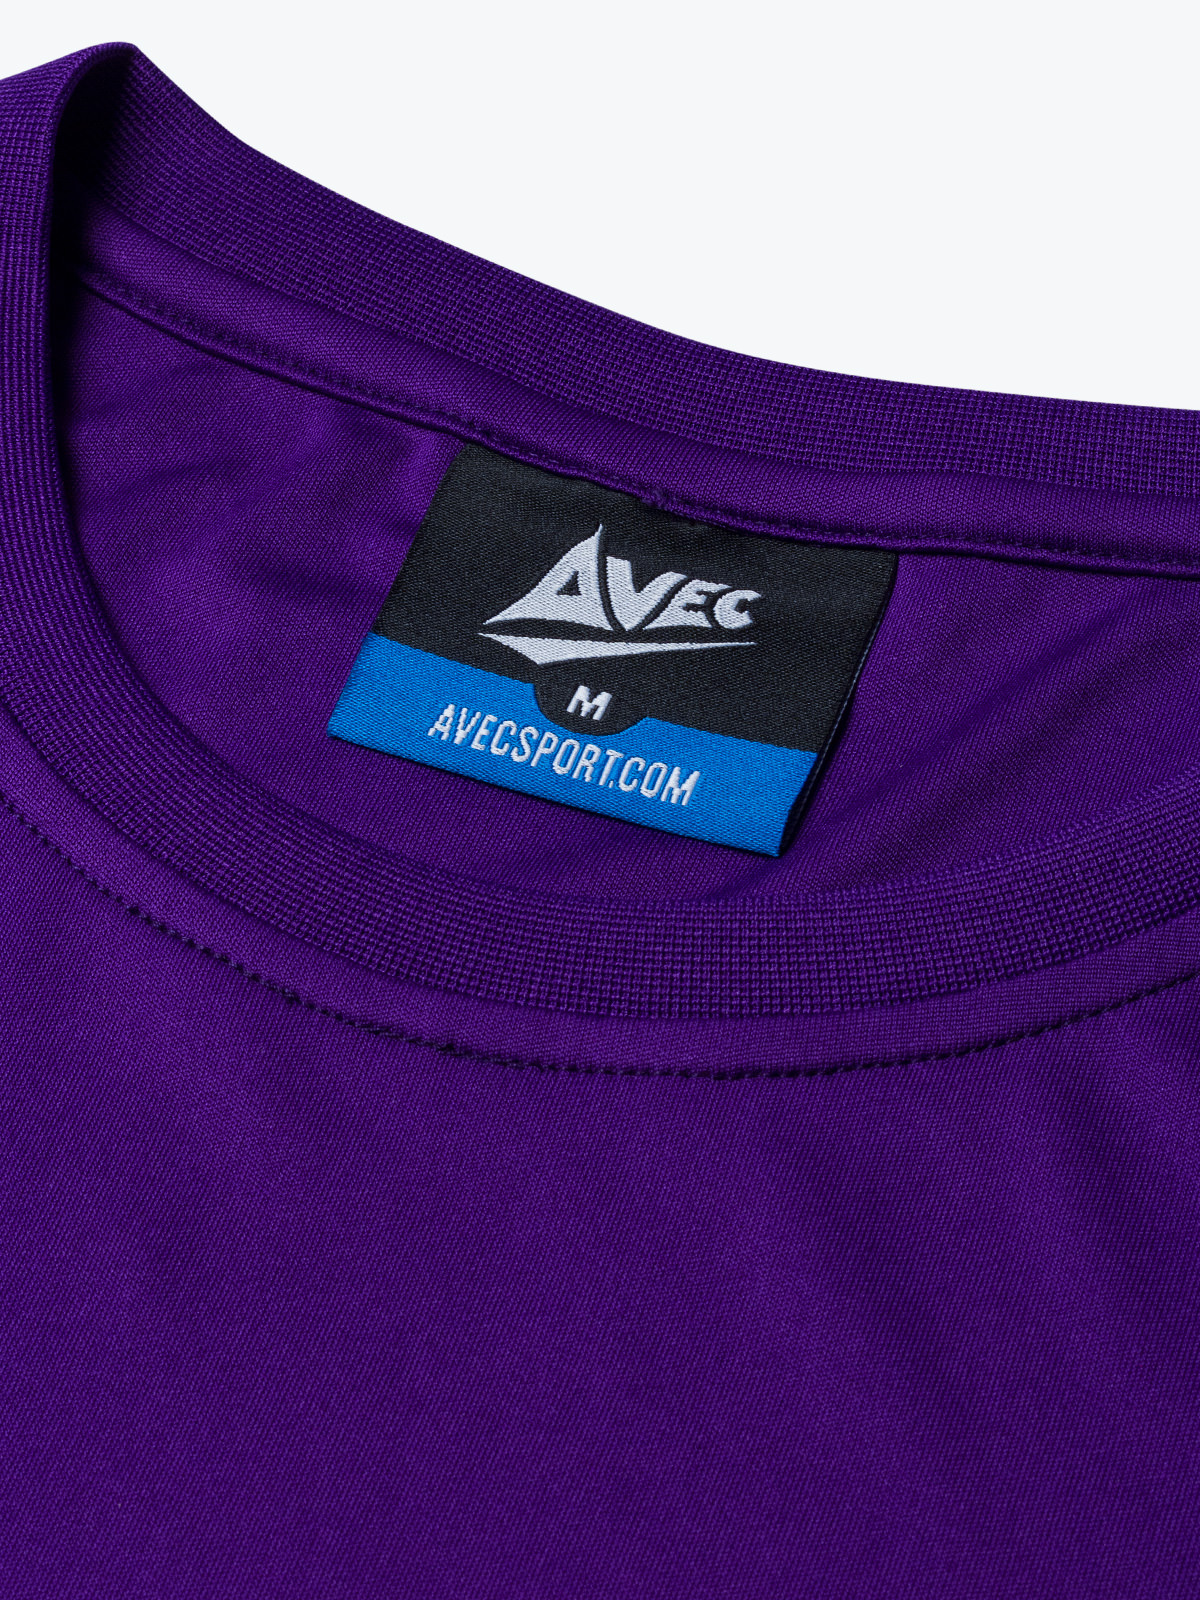 picture of s/s vibrant jersey - purple